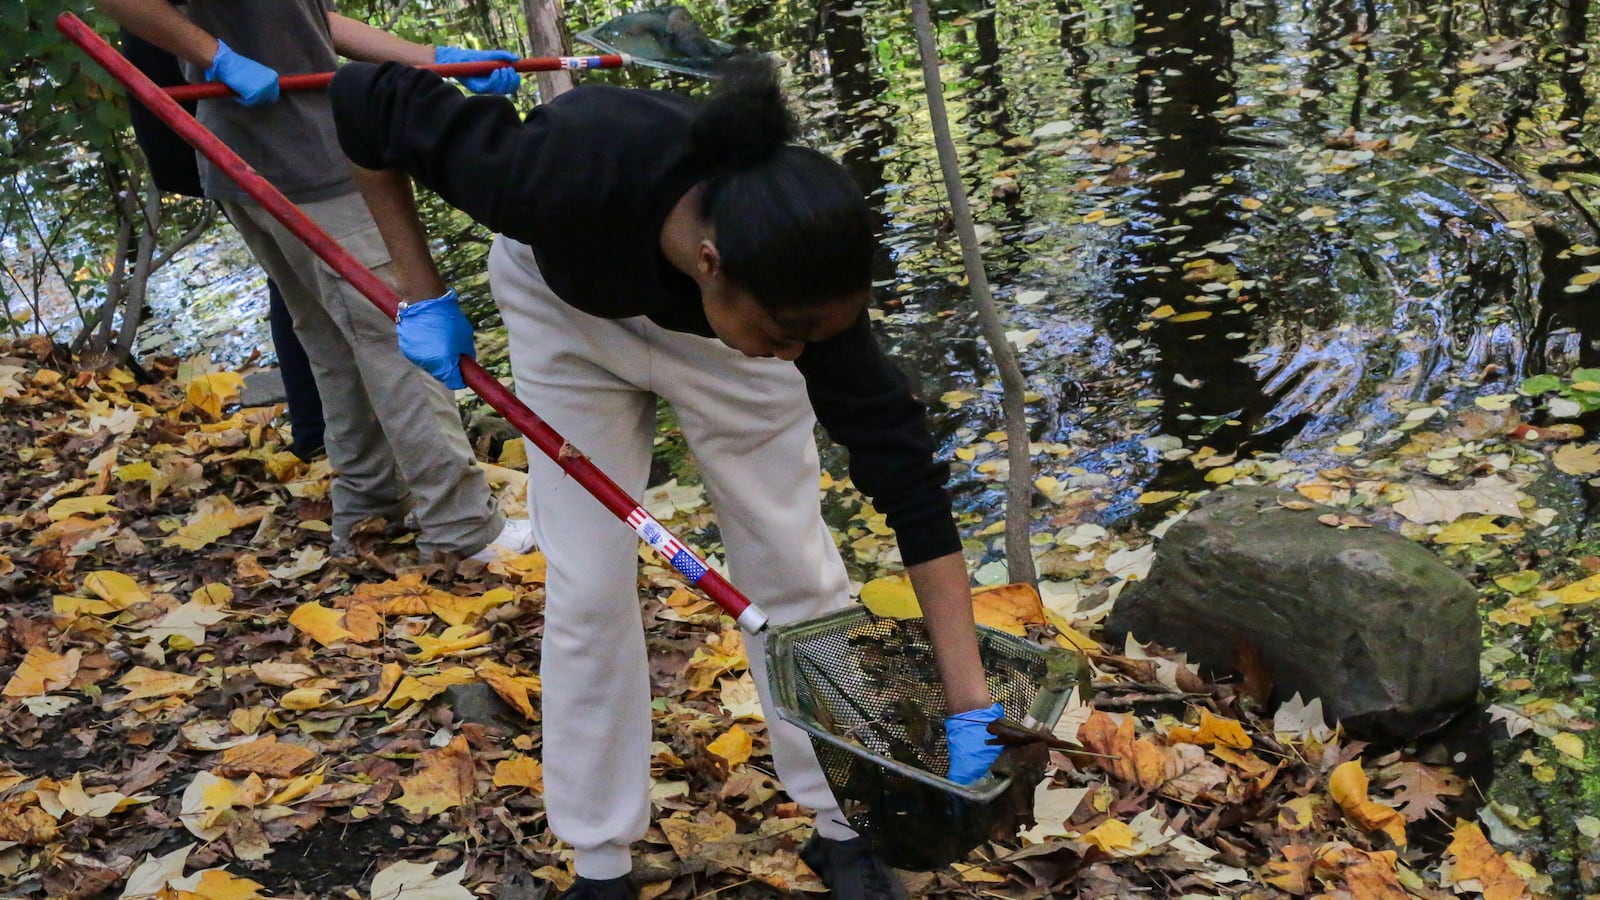 A person in a black shirt and beige pants bends over to pull something out of a net. The person is in a park, standing on yellow and orange leaves next to a stream.